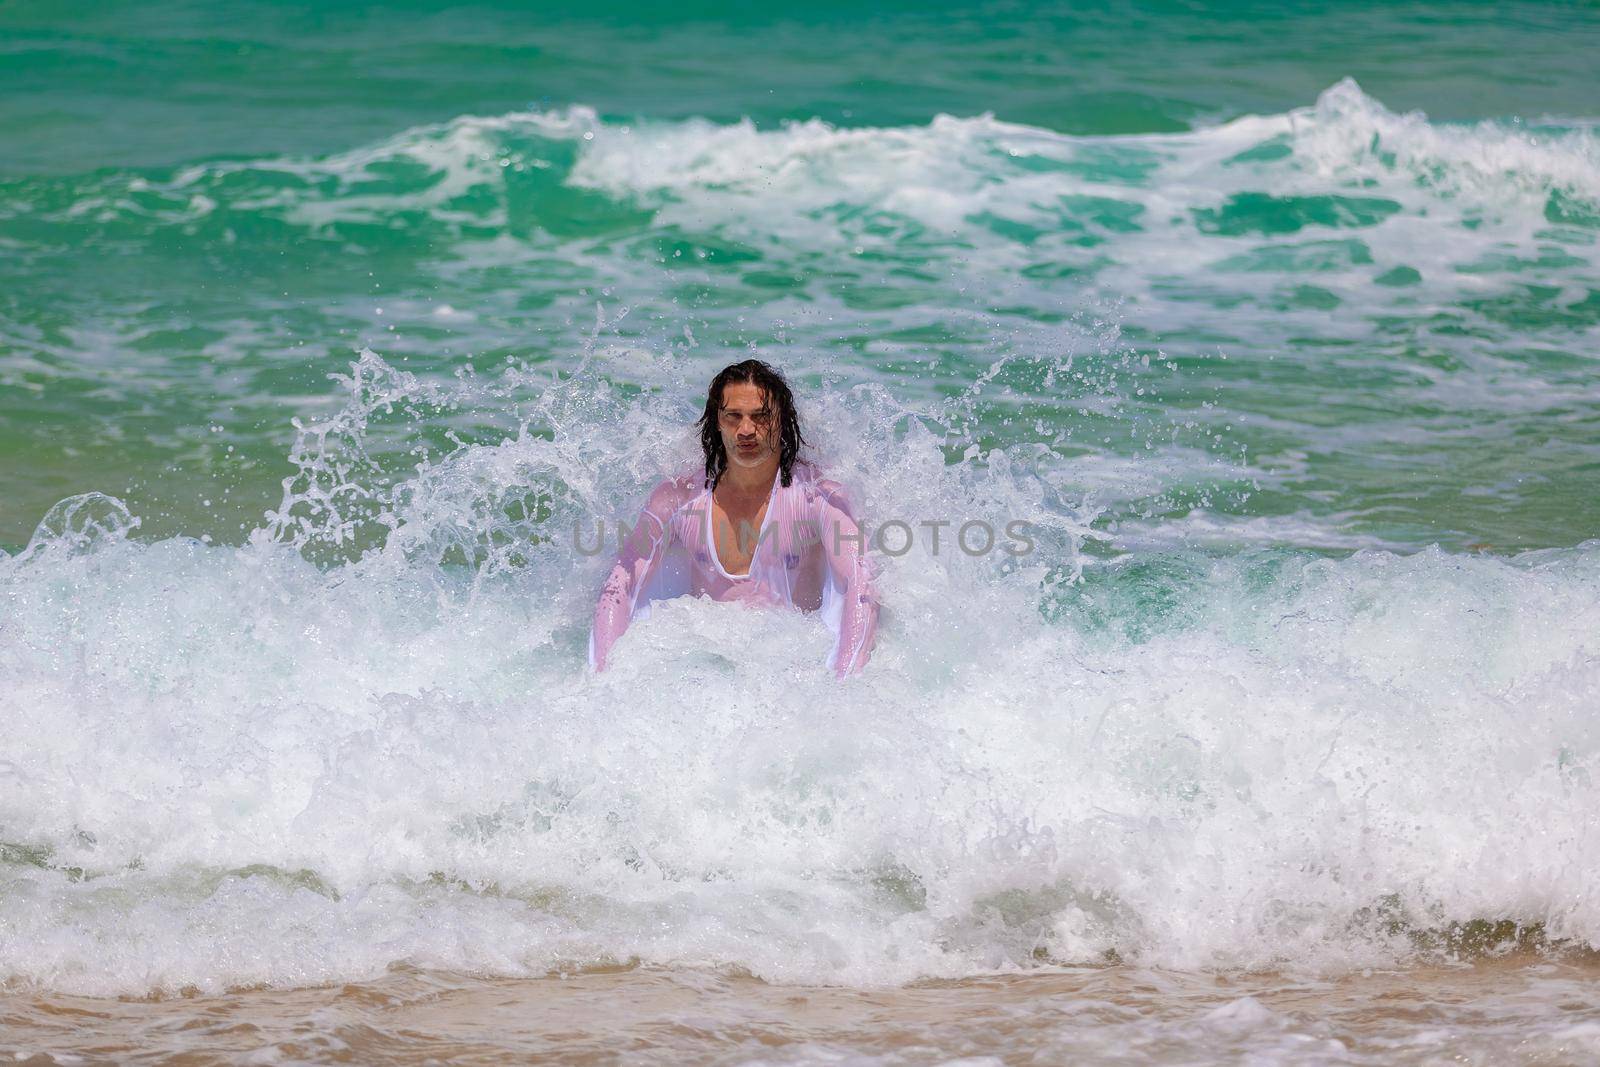 A man with long hair in a white shirt resists powerful strong and foamy waves. The spray hits him in the back